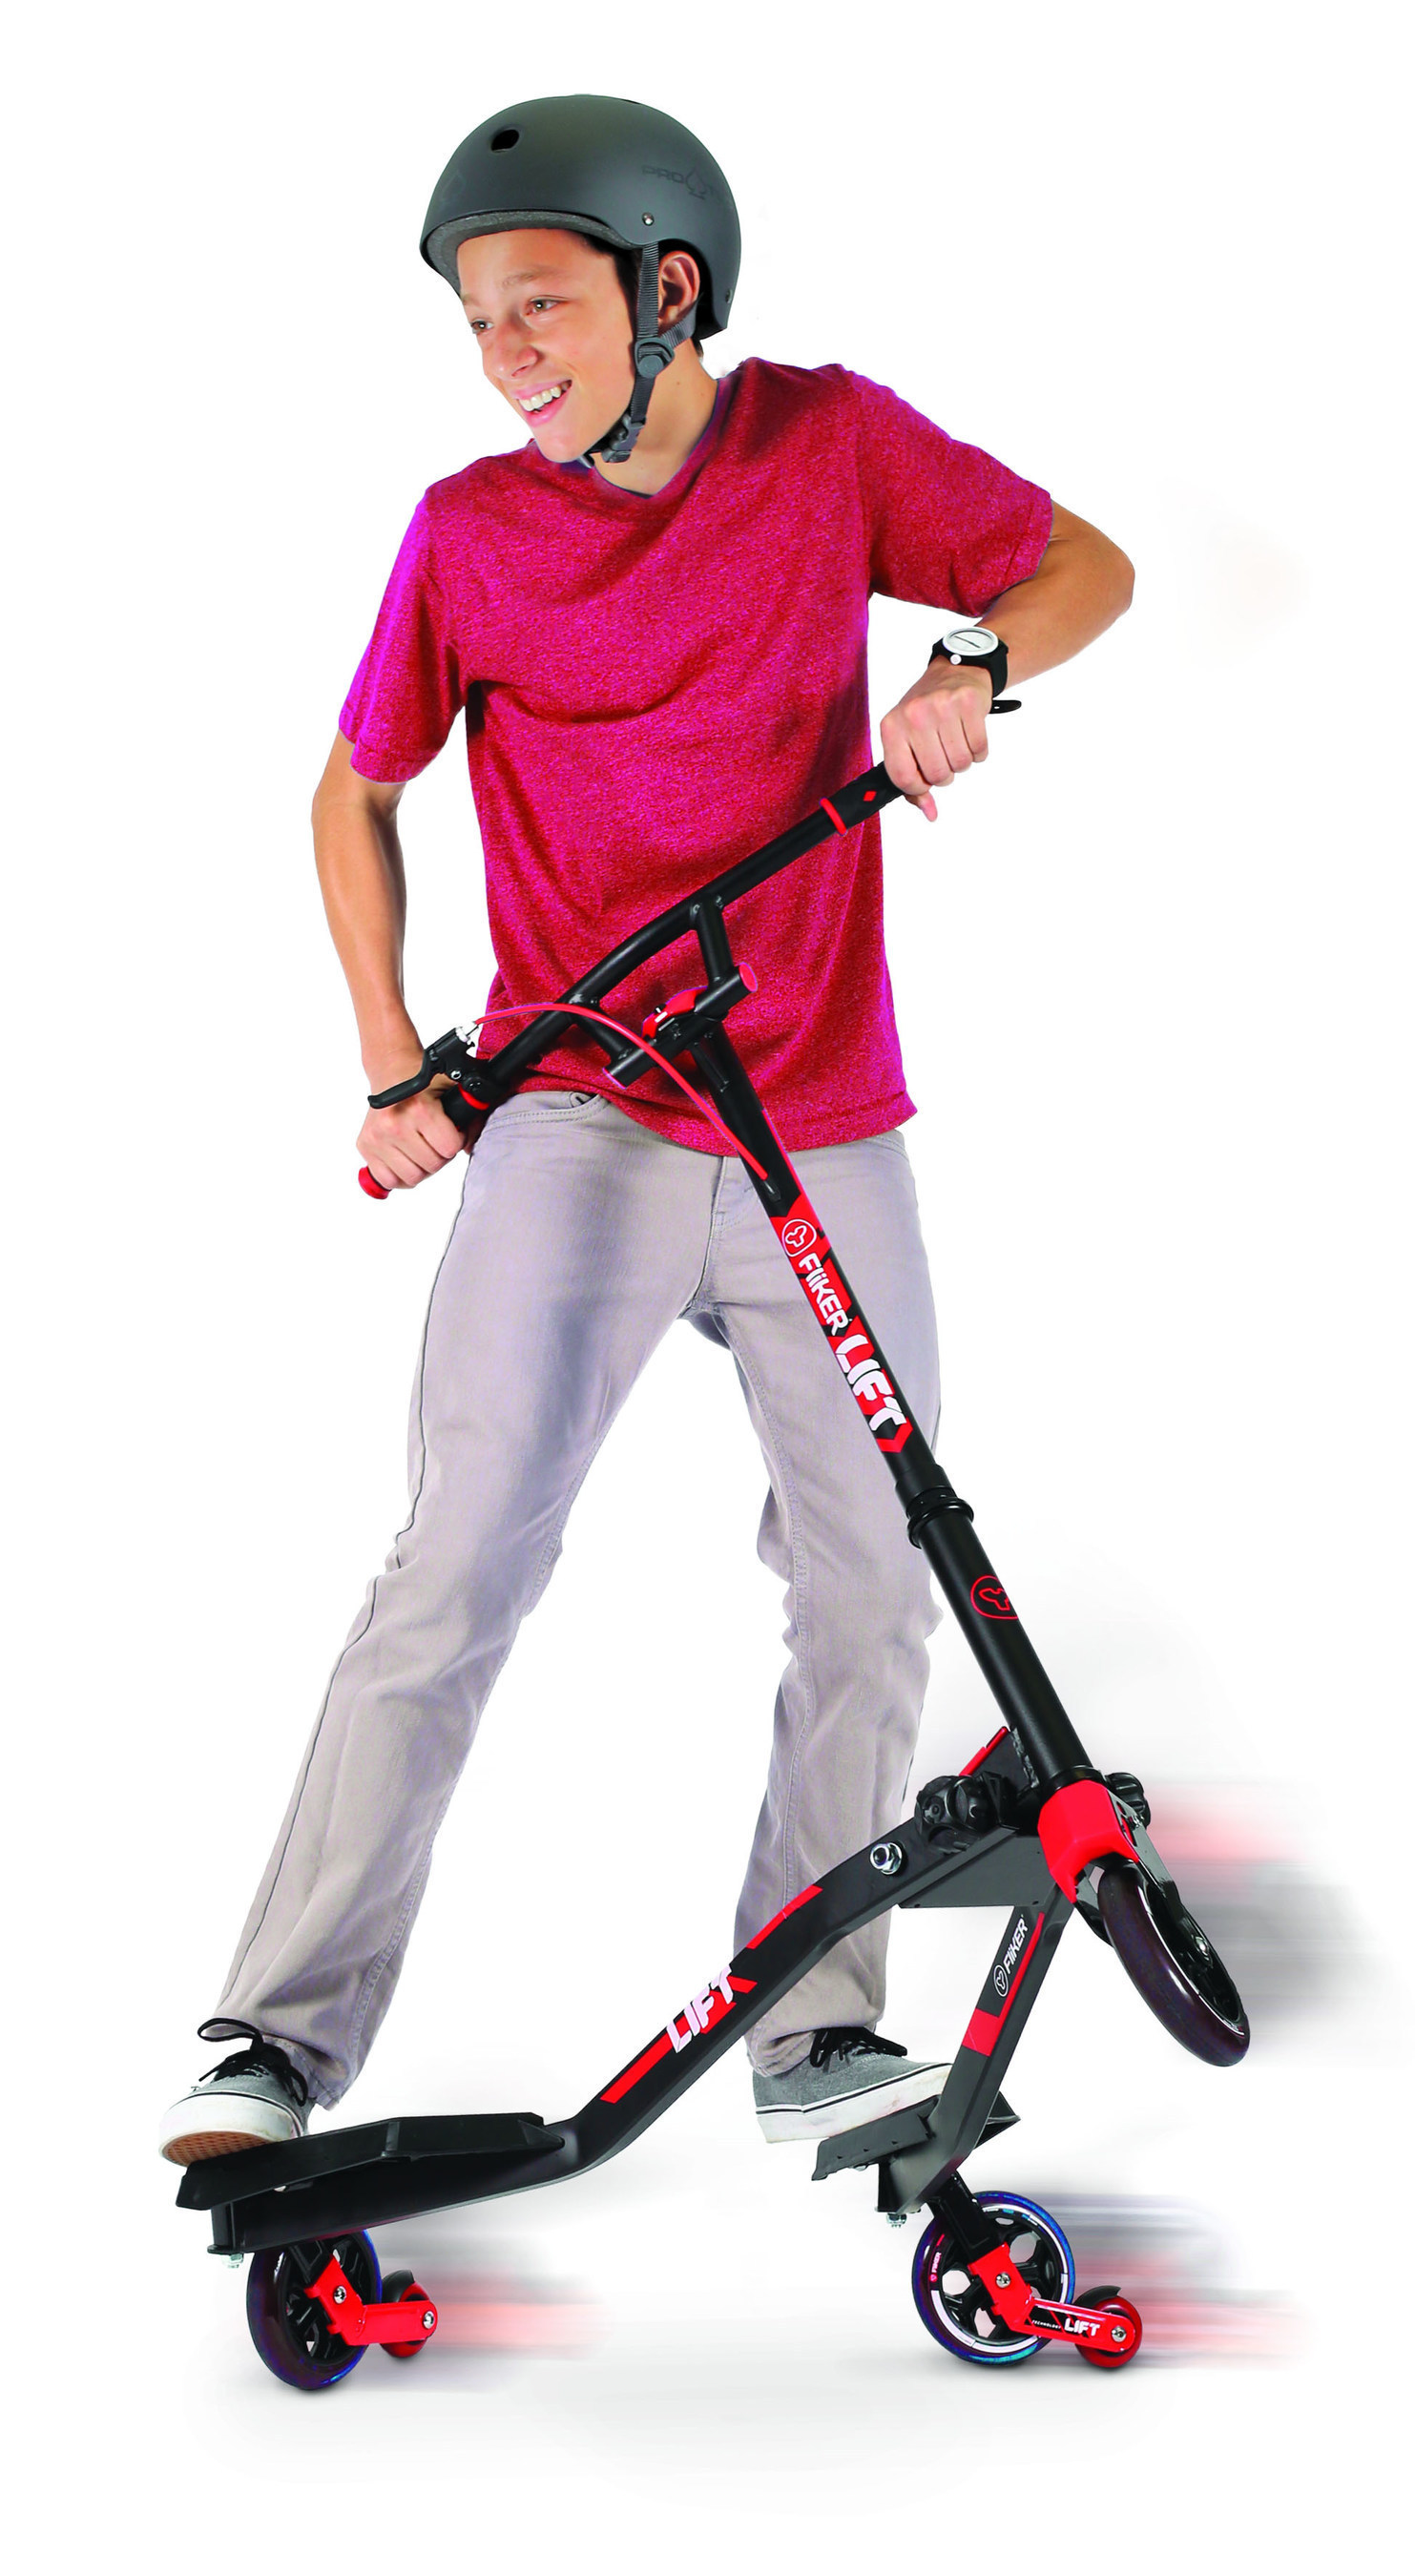 Y Fliker LIFT is the newest innovation from Yvolution. Using patent-pending LIFT technology - riders can now just lean back and LIFT. Riders can wheelie forward and even sideways! A 360-degree free-spinning handle bar and angled steering column allows for more tricks than ever before.